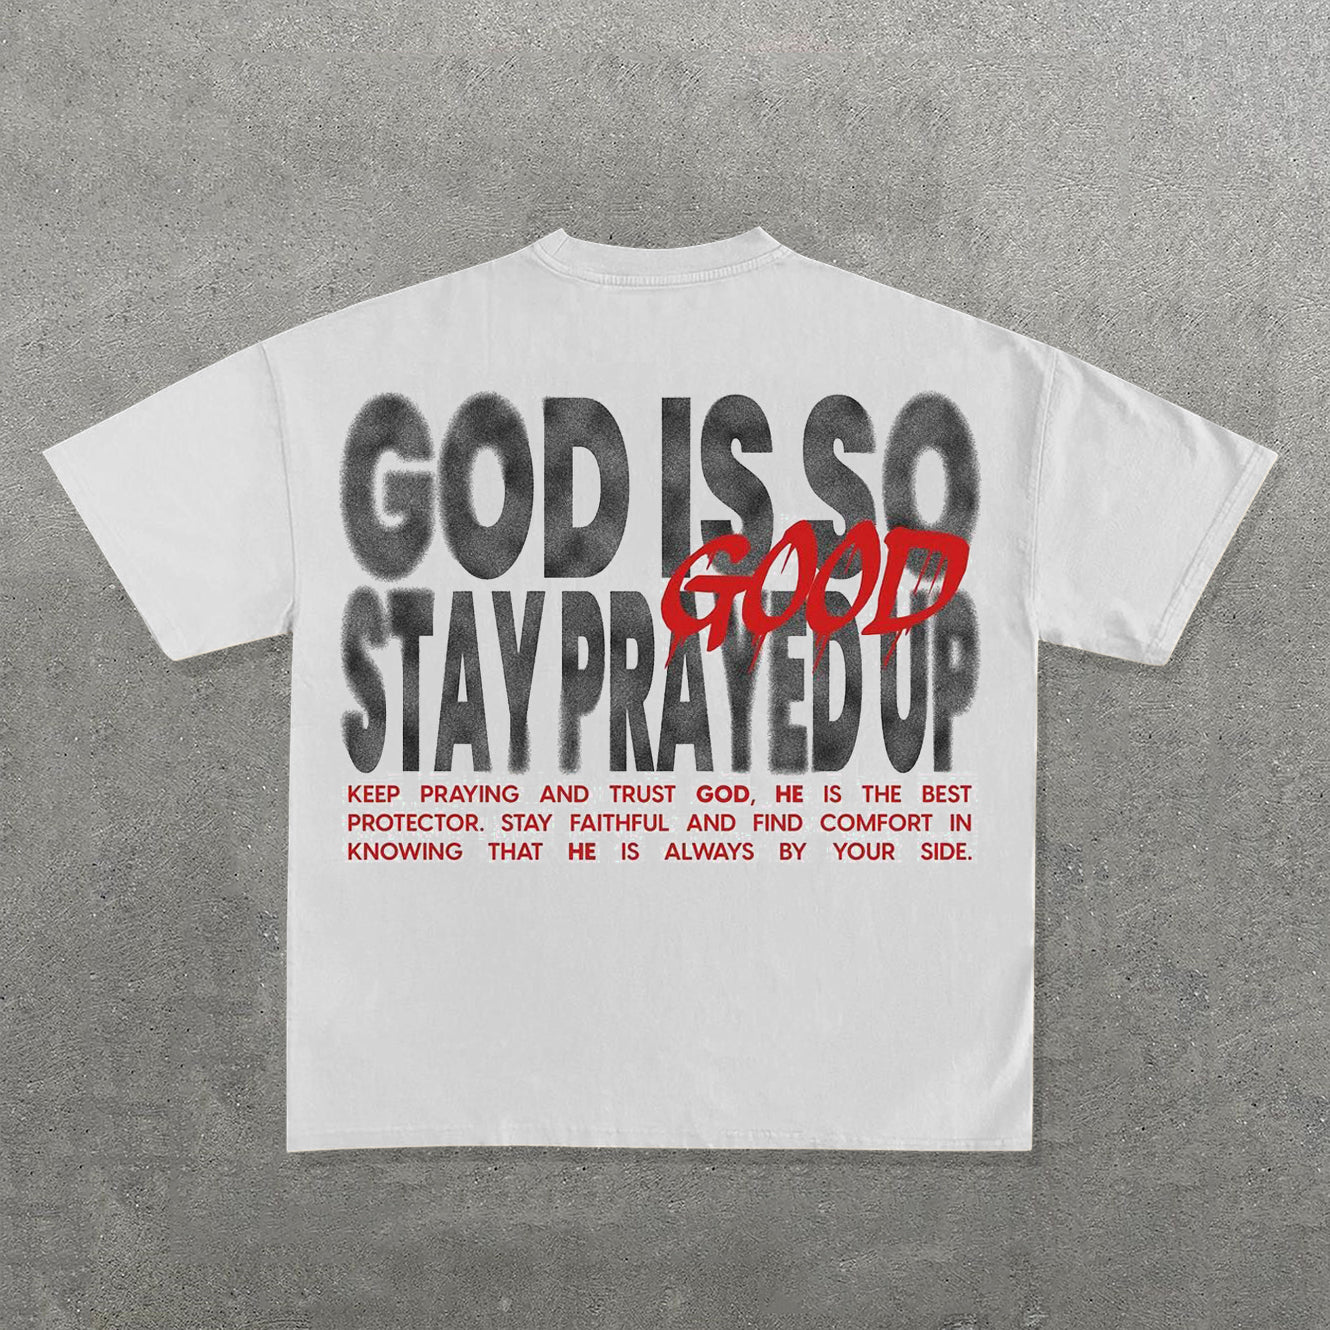 Letters God Is So Good Stay Prayed Up Print Short Sleeve T-Shirt